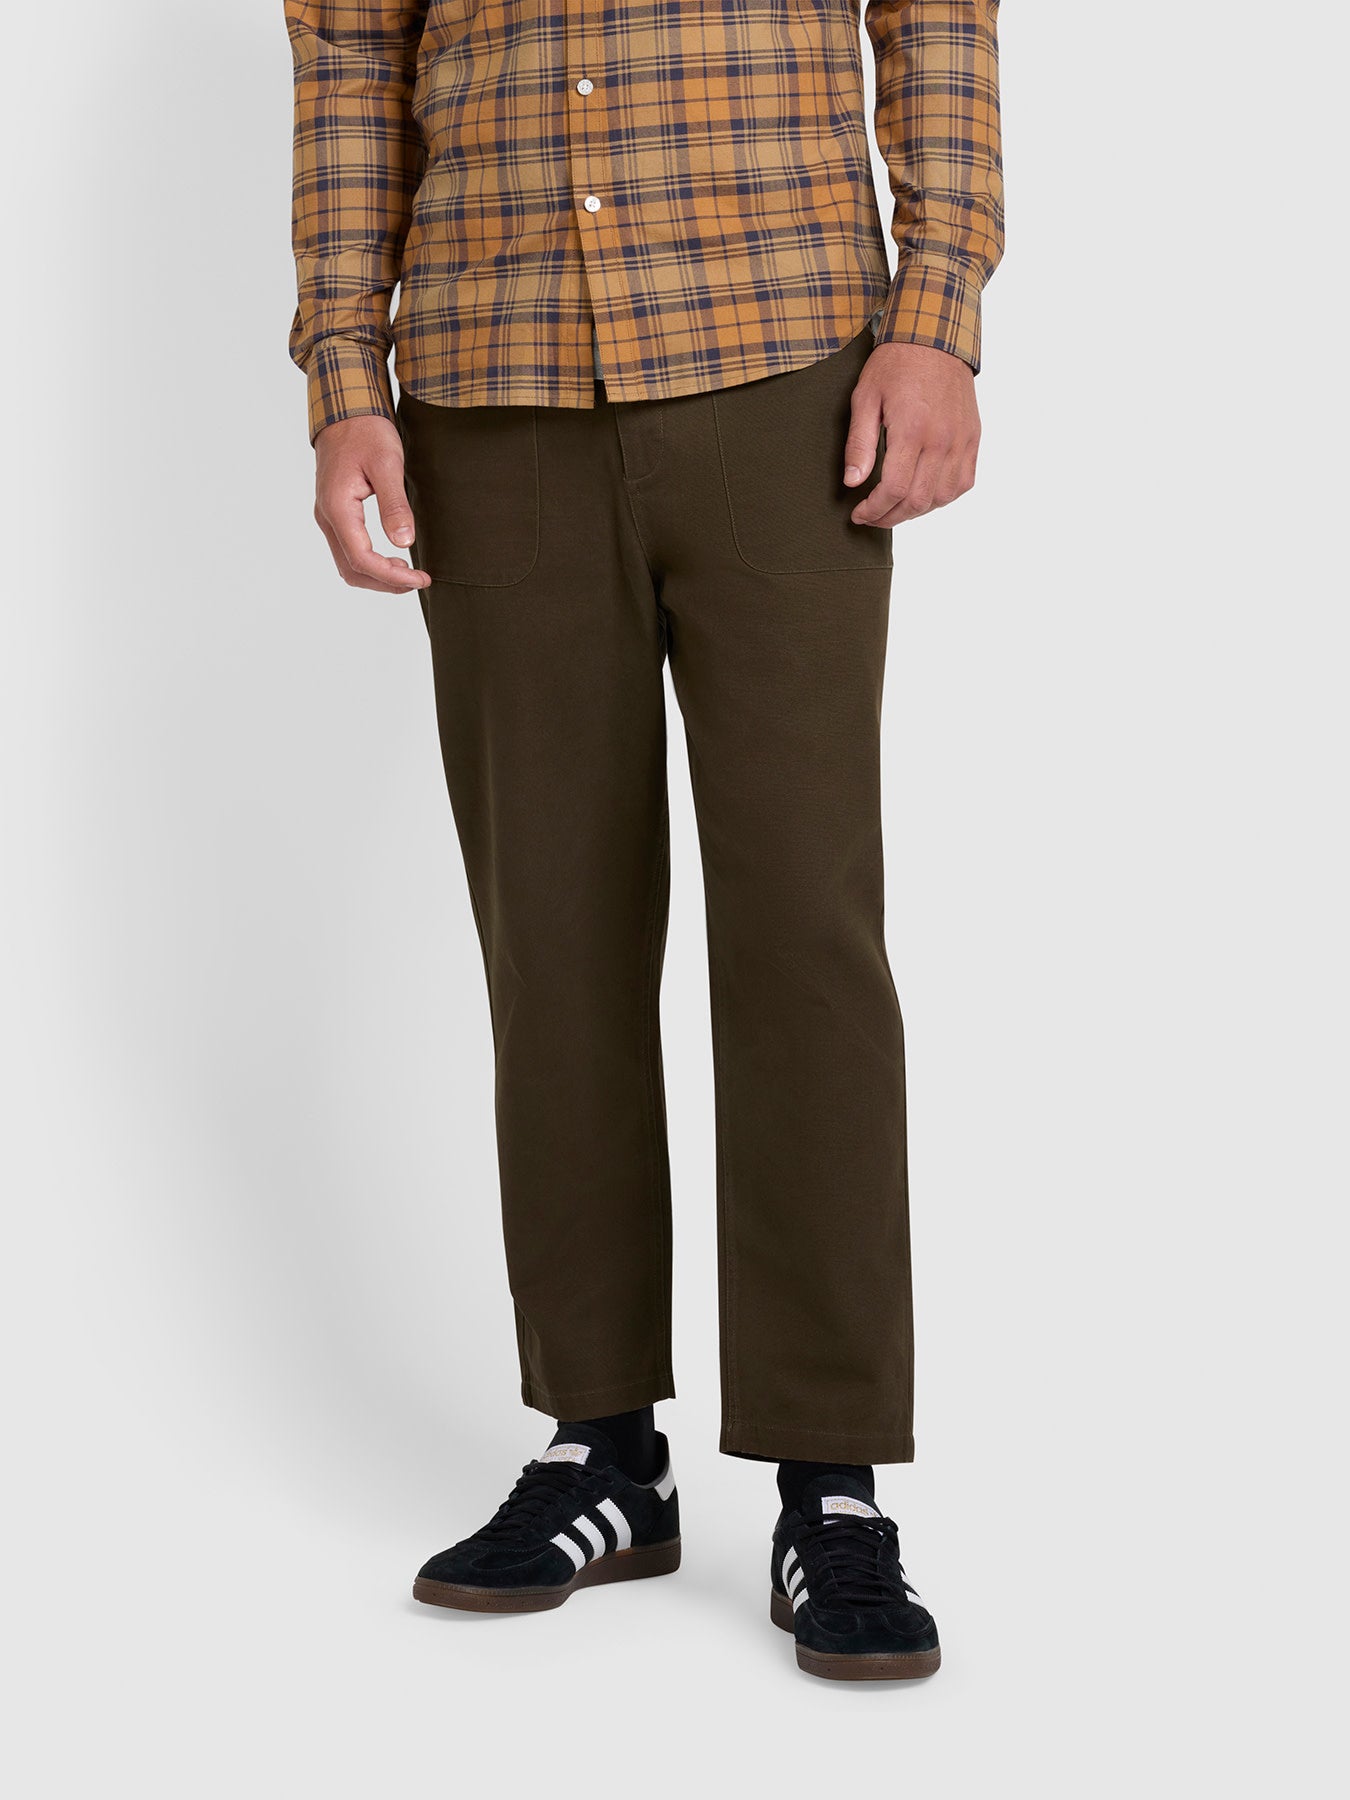 View Hawtin Relaxed Fit Canvas Trousers In Olive Green information